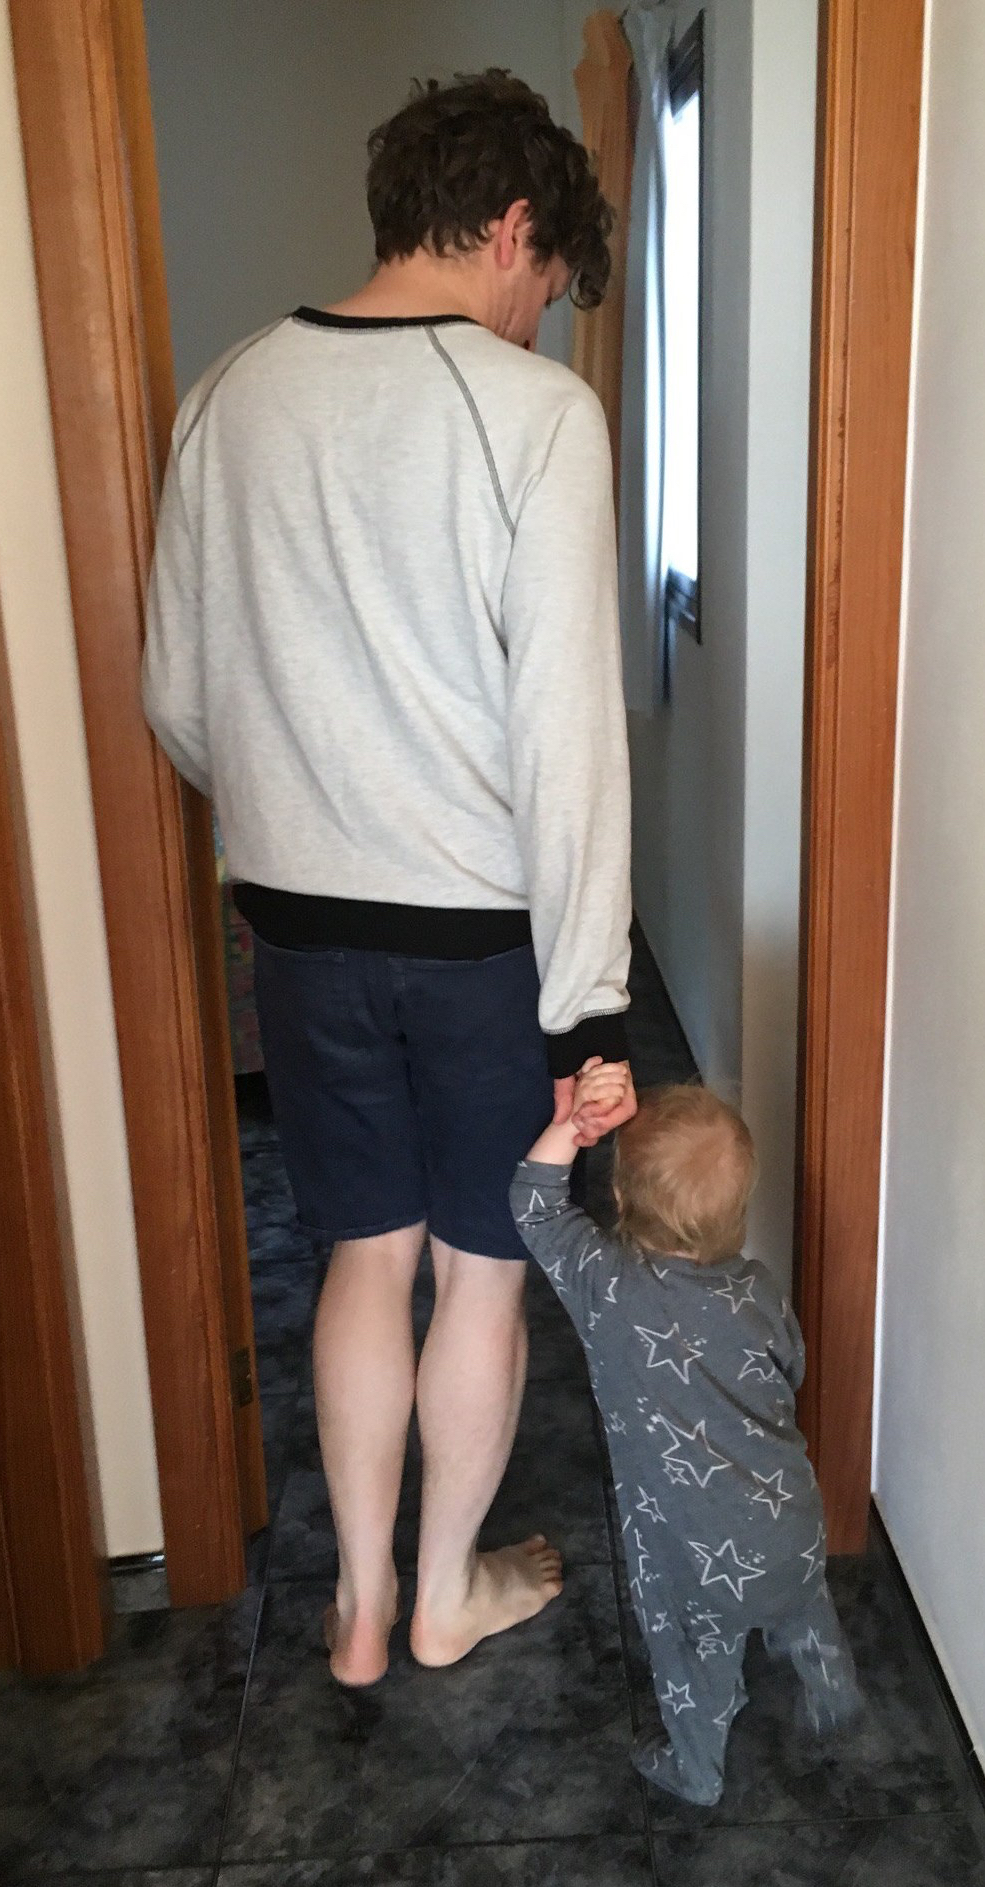 A man and a baby walk down a tiled corridor in an apartment.